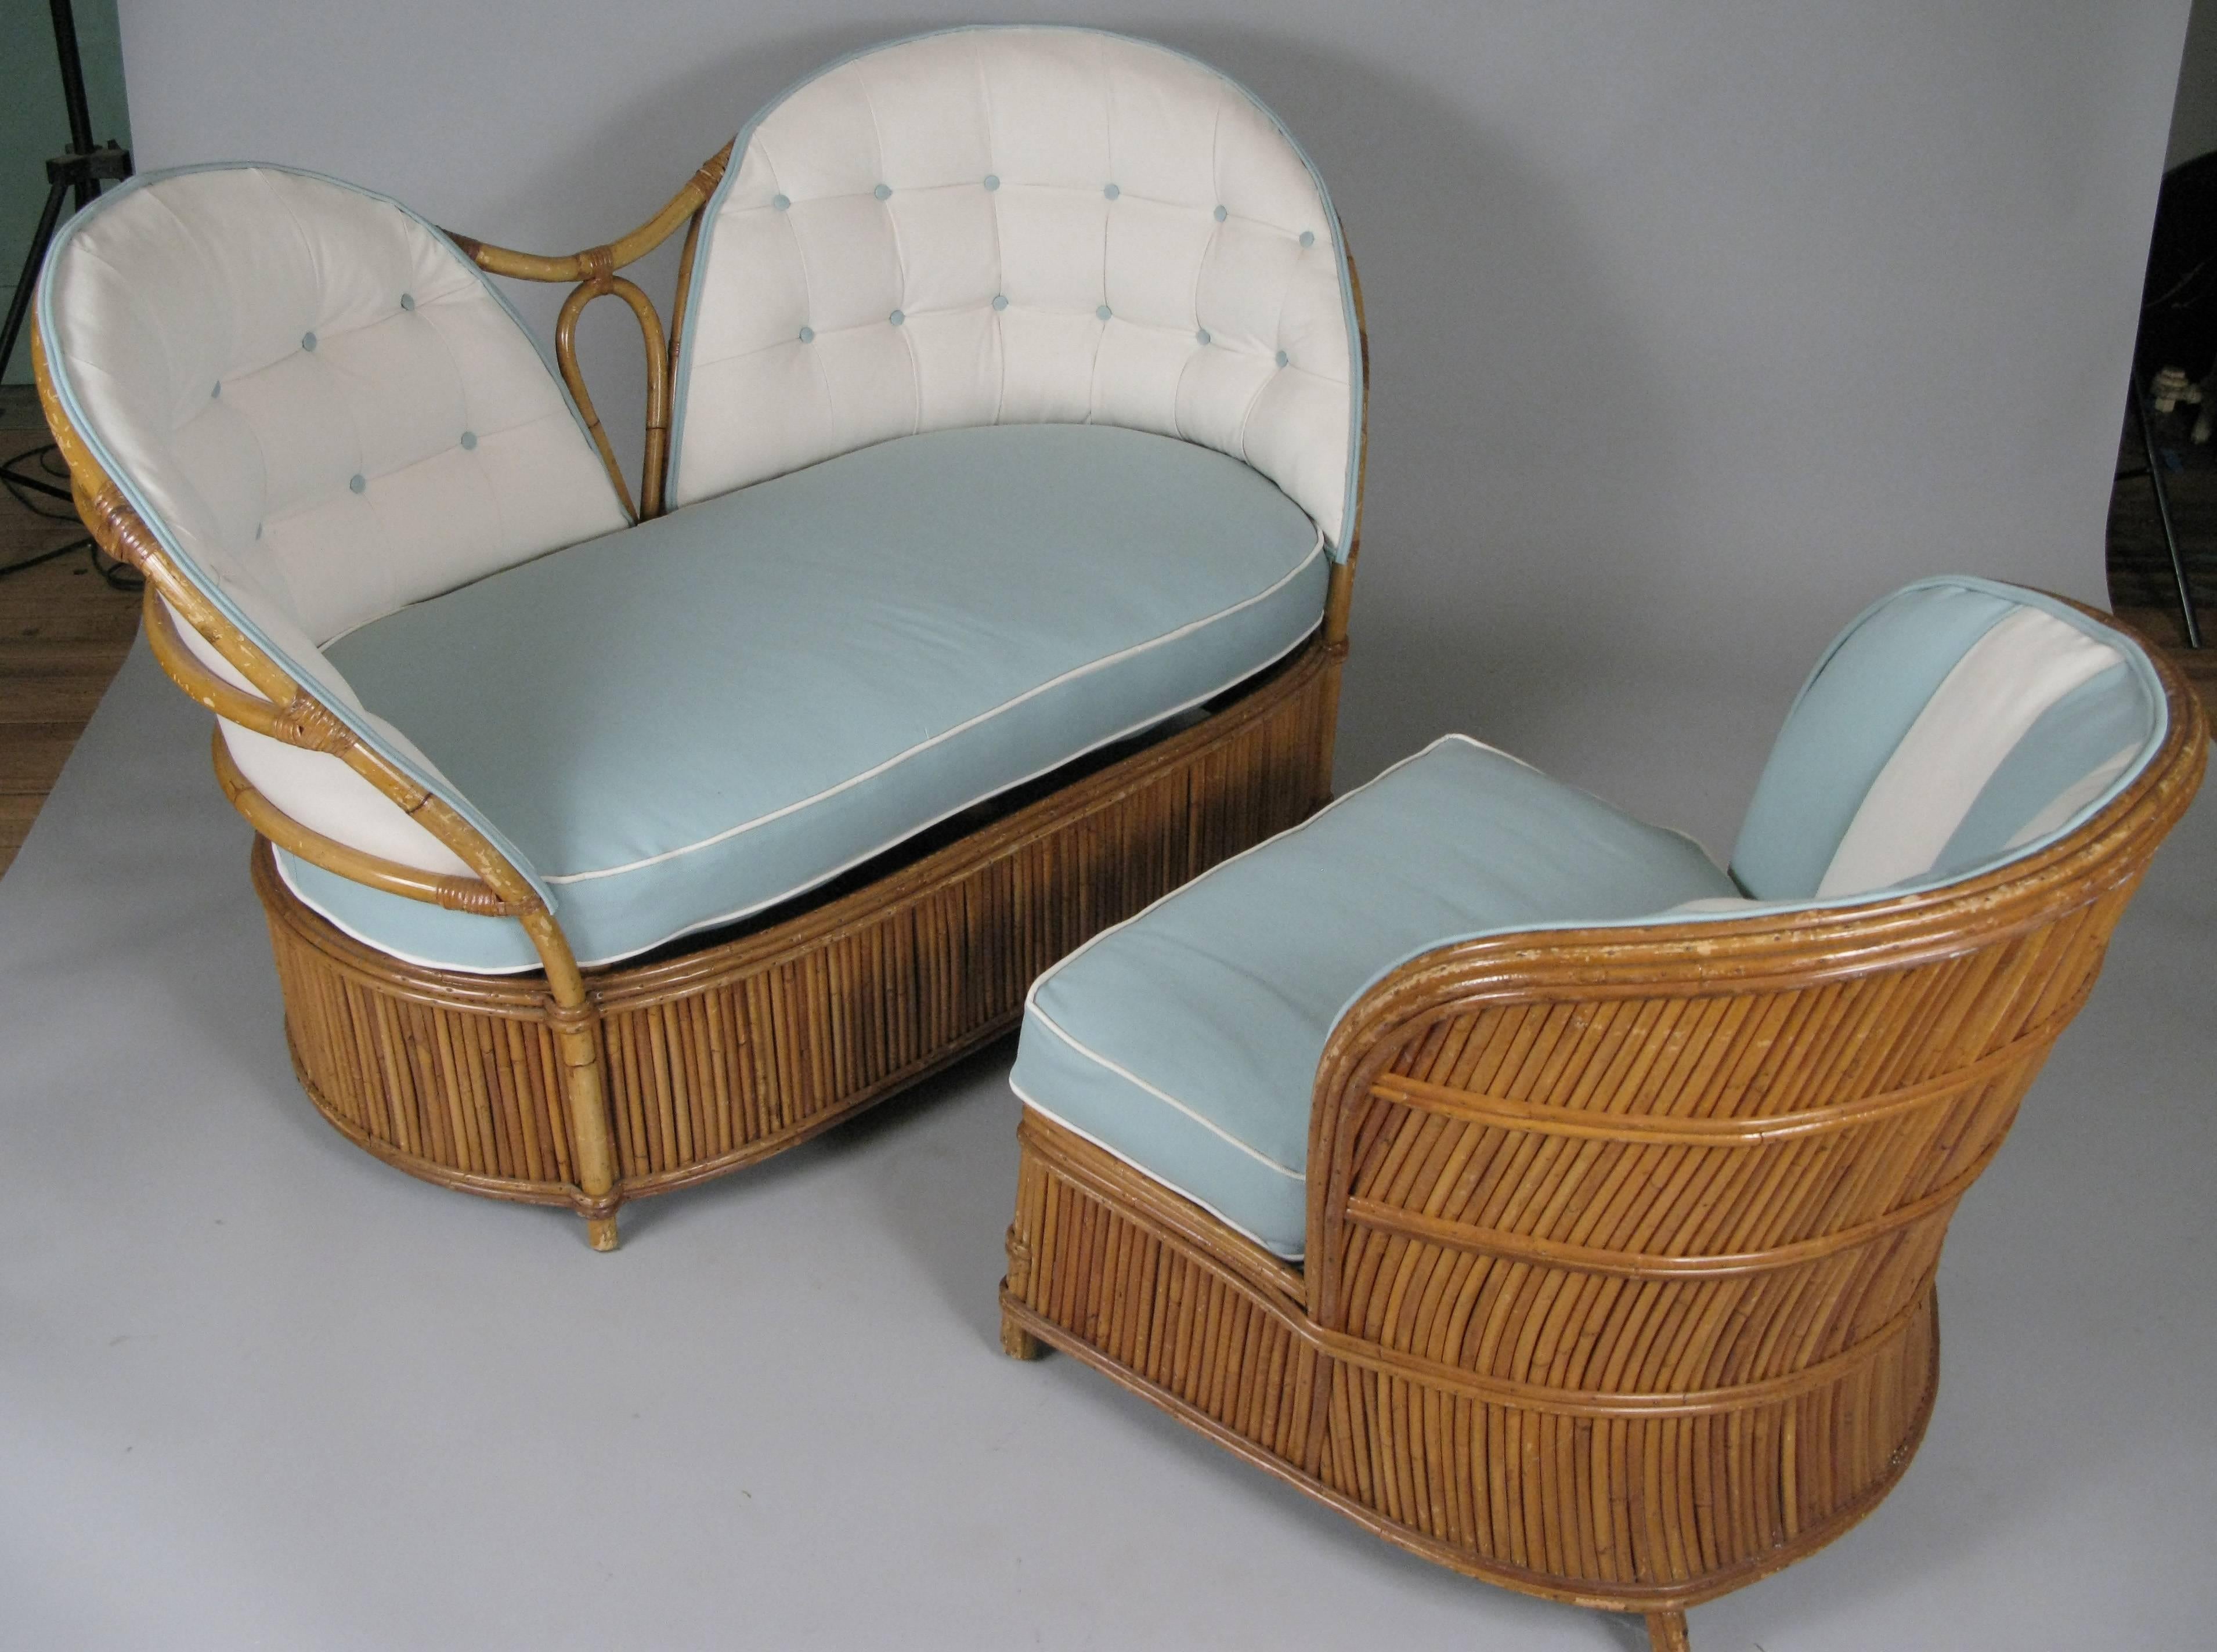 An extremely charming vintage 1940s reeded rattan settee and matching lounge chair with new upholstery in a very nice pattern of box quilting with contrasting buttons on the settee and vertical channel upholstery on the chair. Frames are in vintage